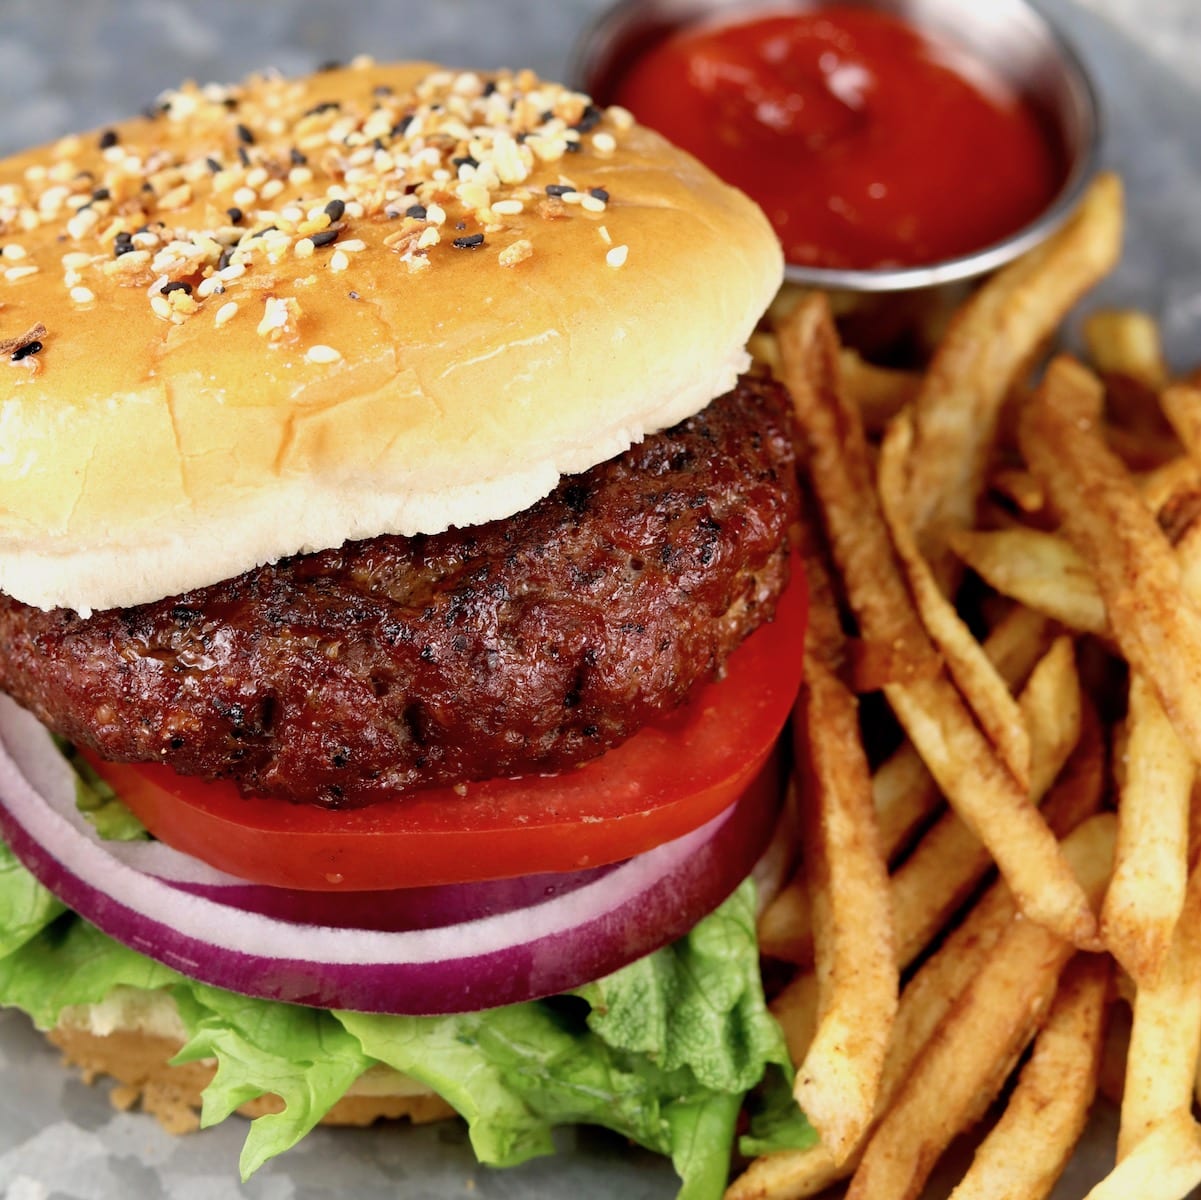 Grilled Classic Burgers with tomato, onion, lettuce on a bun served with ketchup and fries